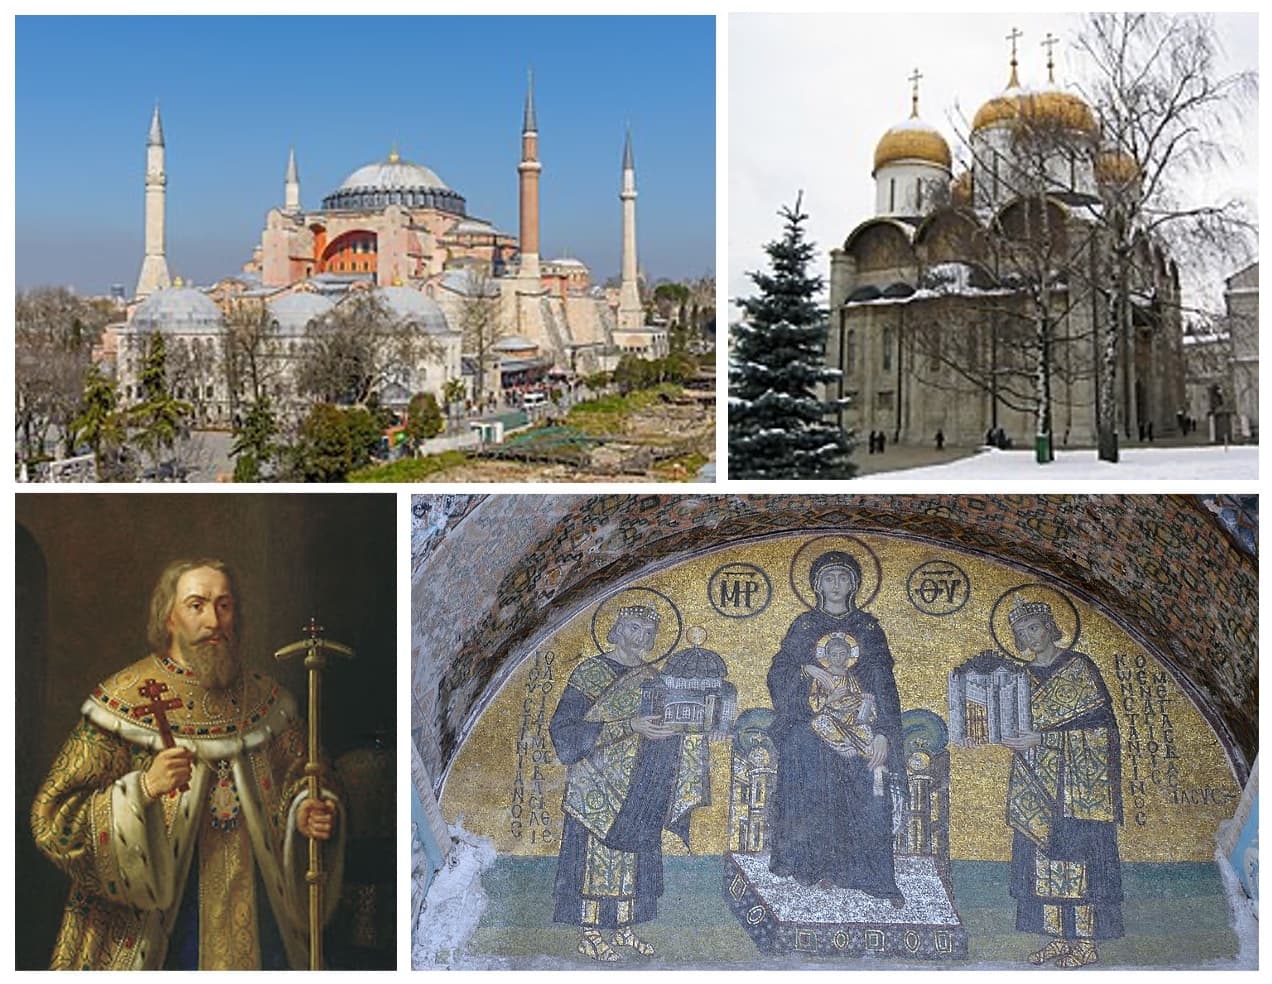 Byzantine-era monuments and art in Istanbul and Moscow